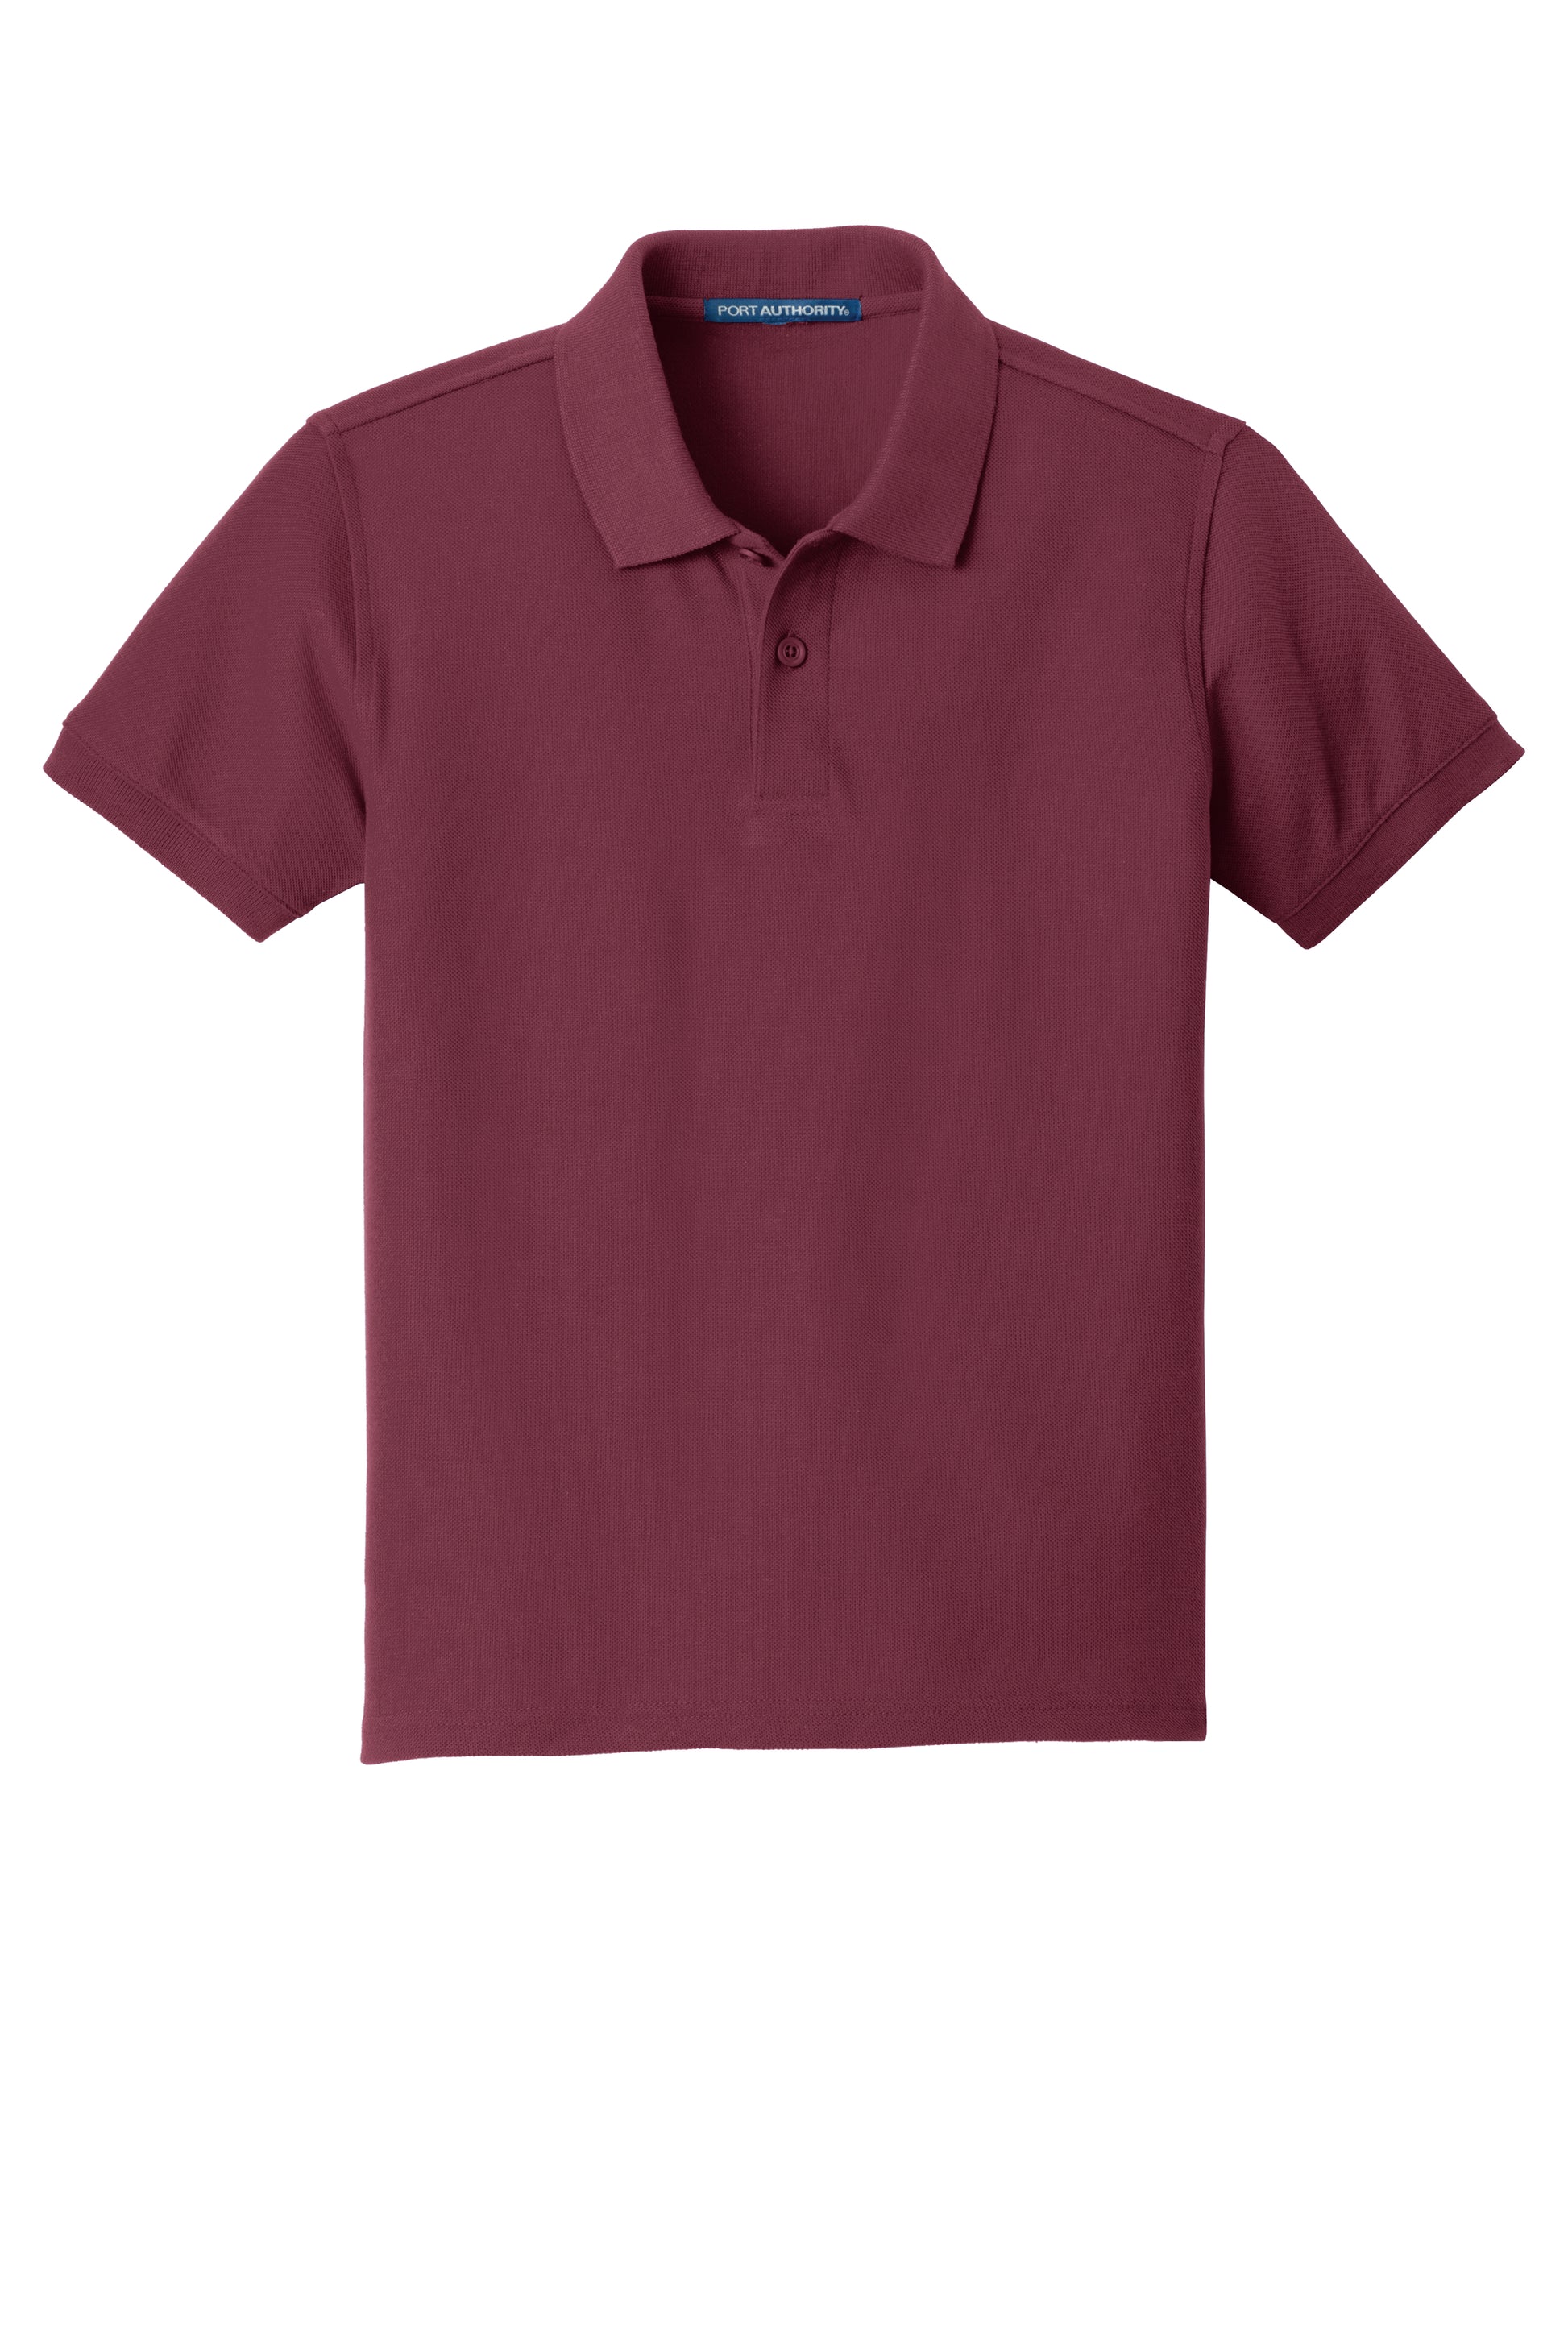 port authority youth core classic pique polo burgundy